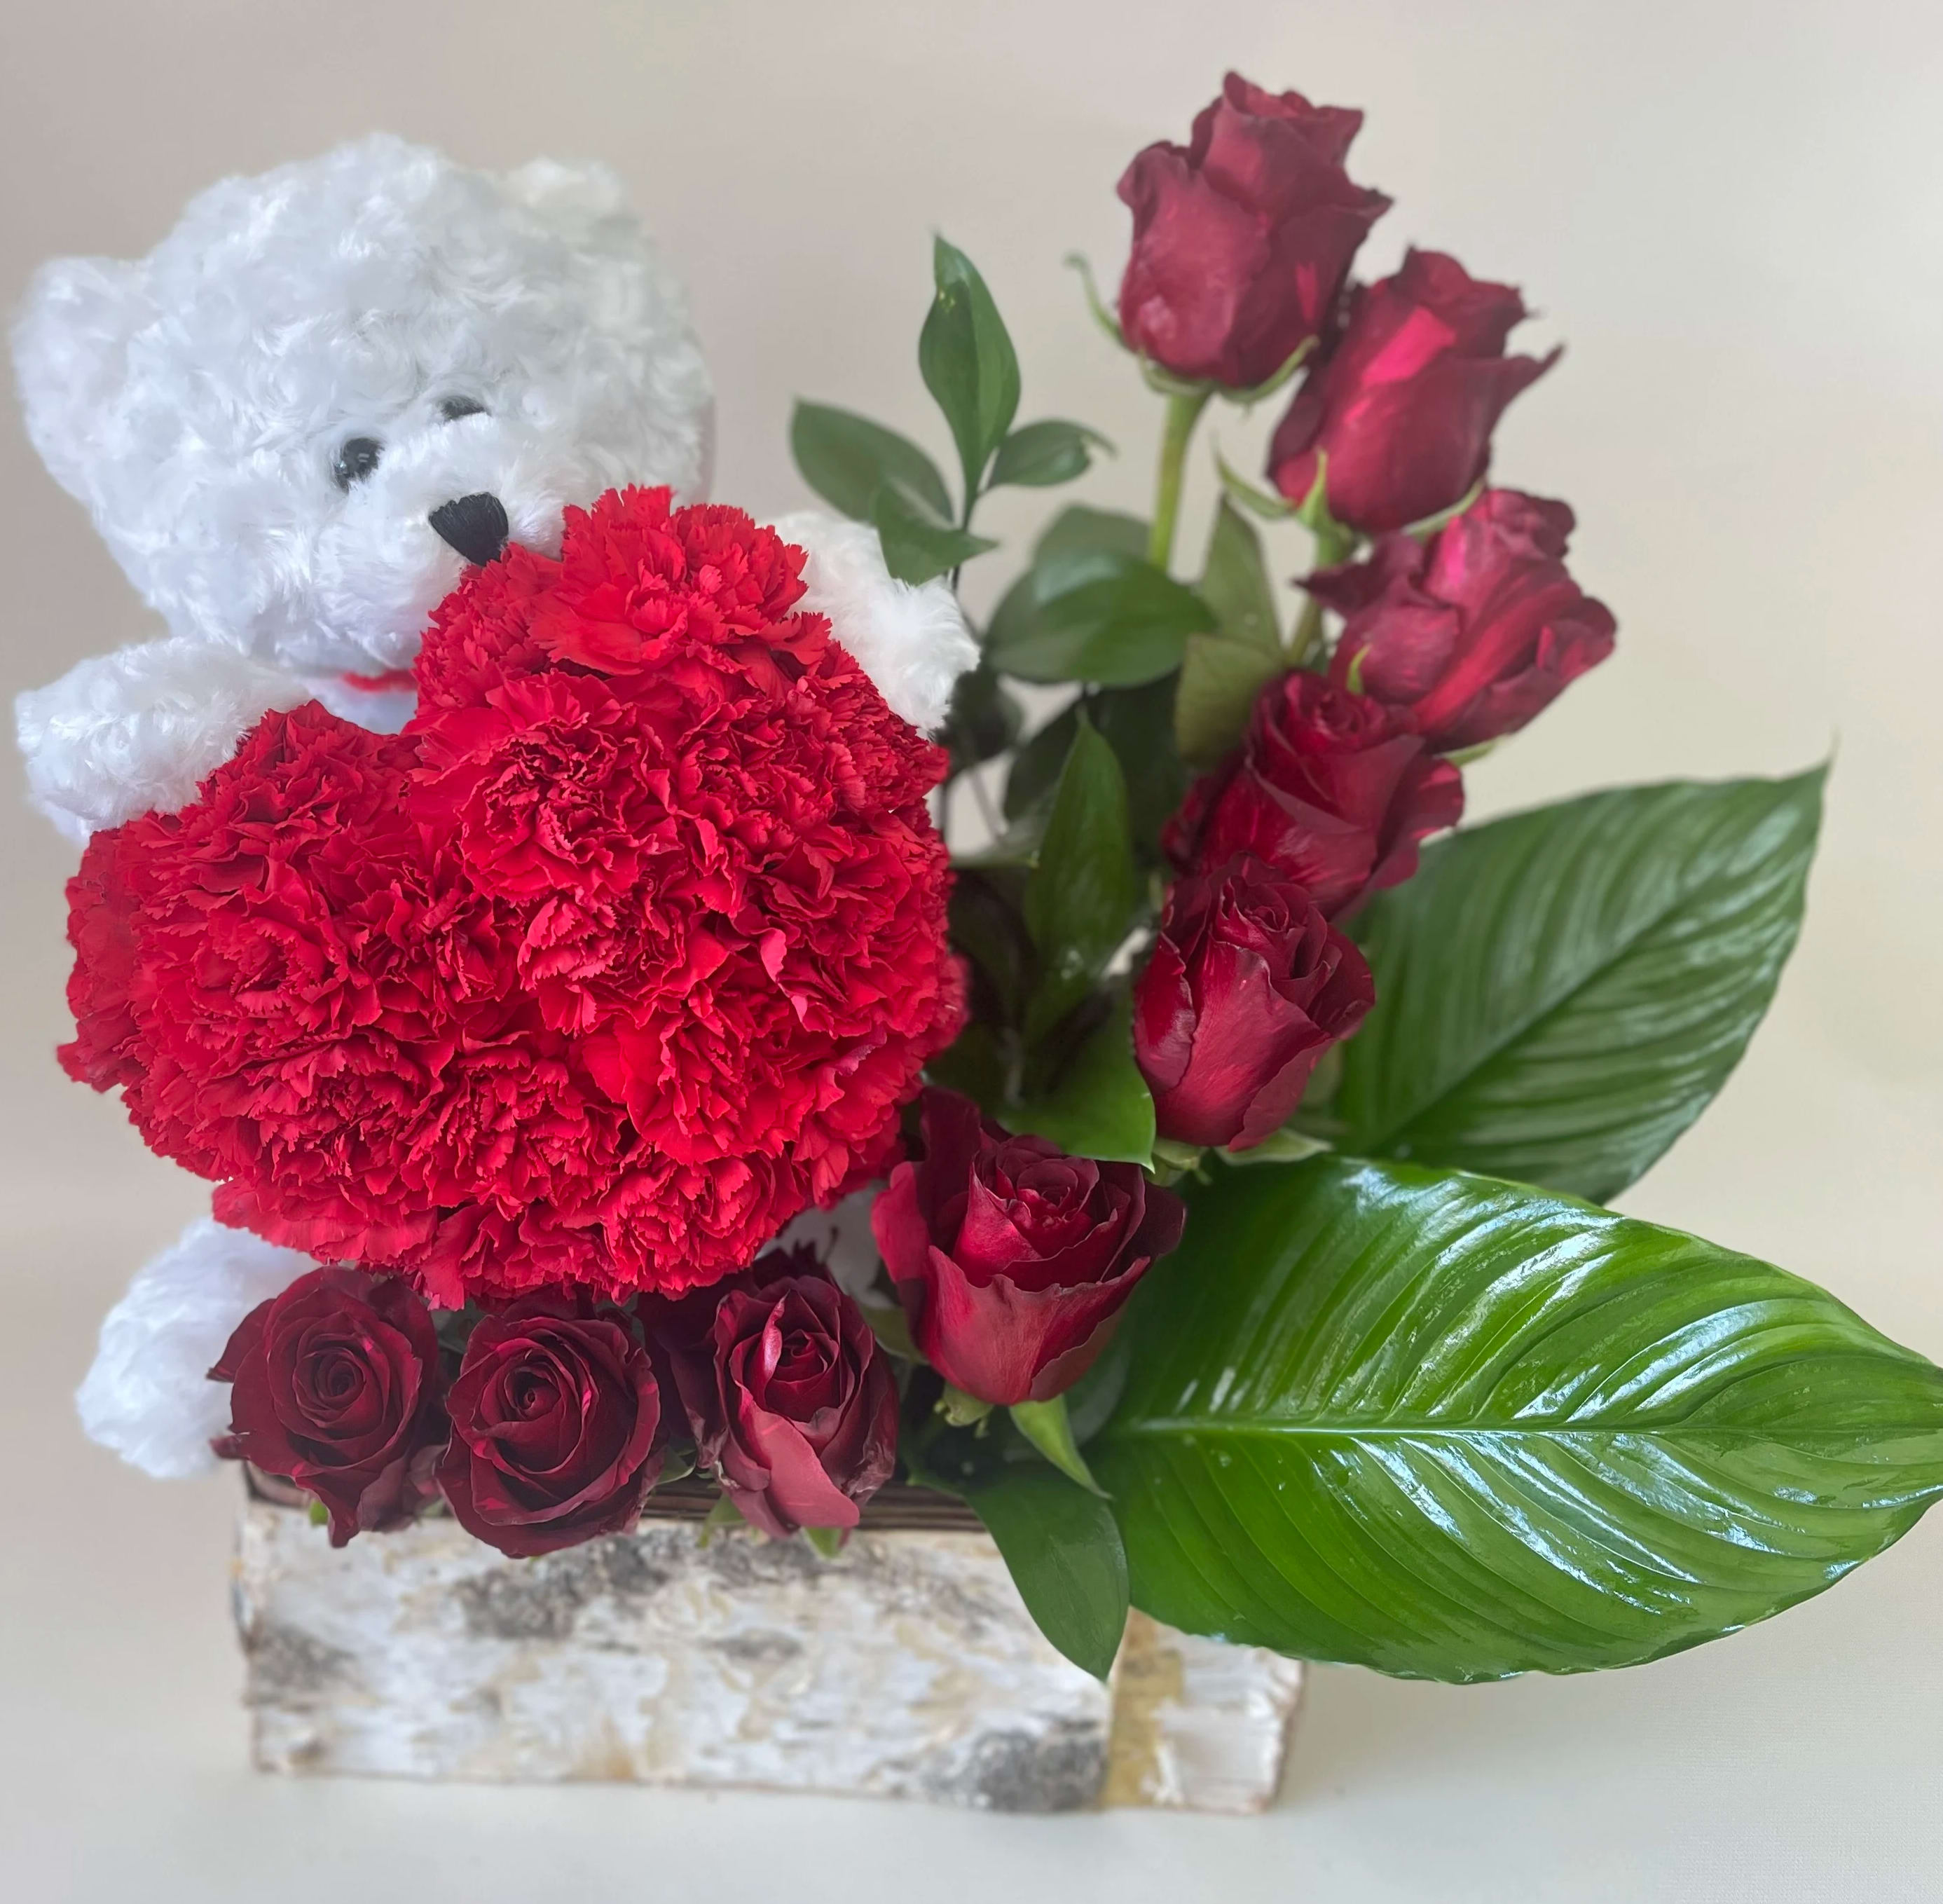 You have my heart - Beautiful arrangement with a teddy bear holding a heart made by red carnations and a stair of roses. (any color can be substitute with the one of your choice)